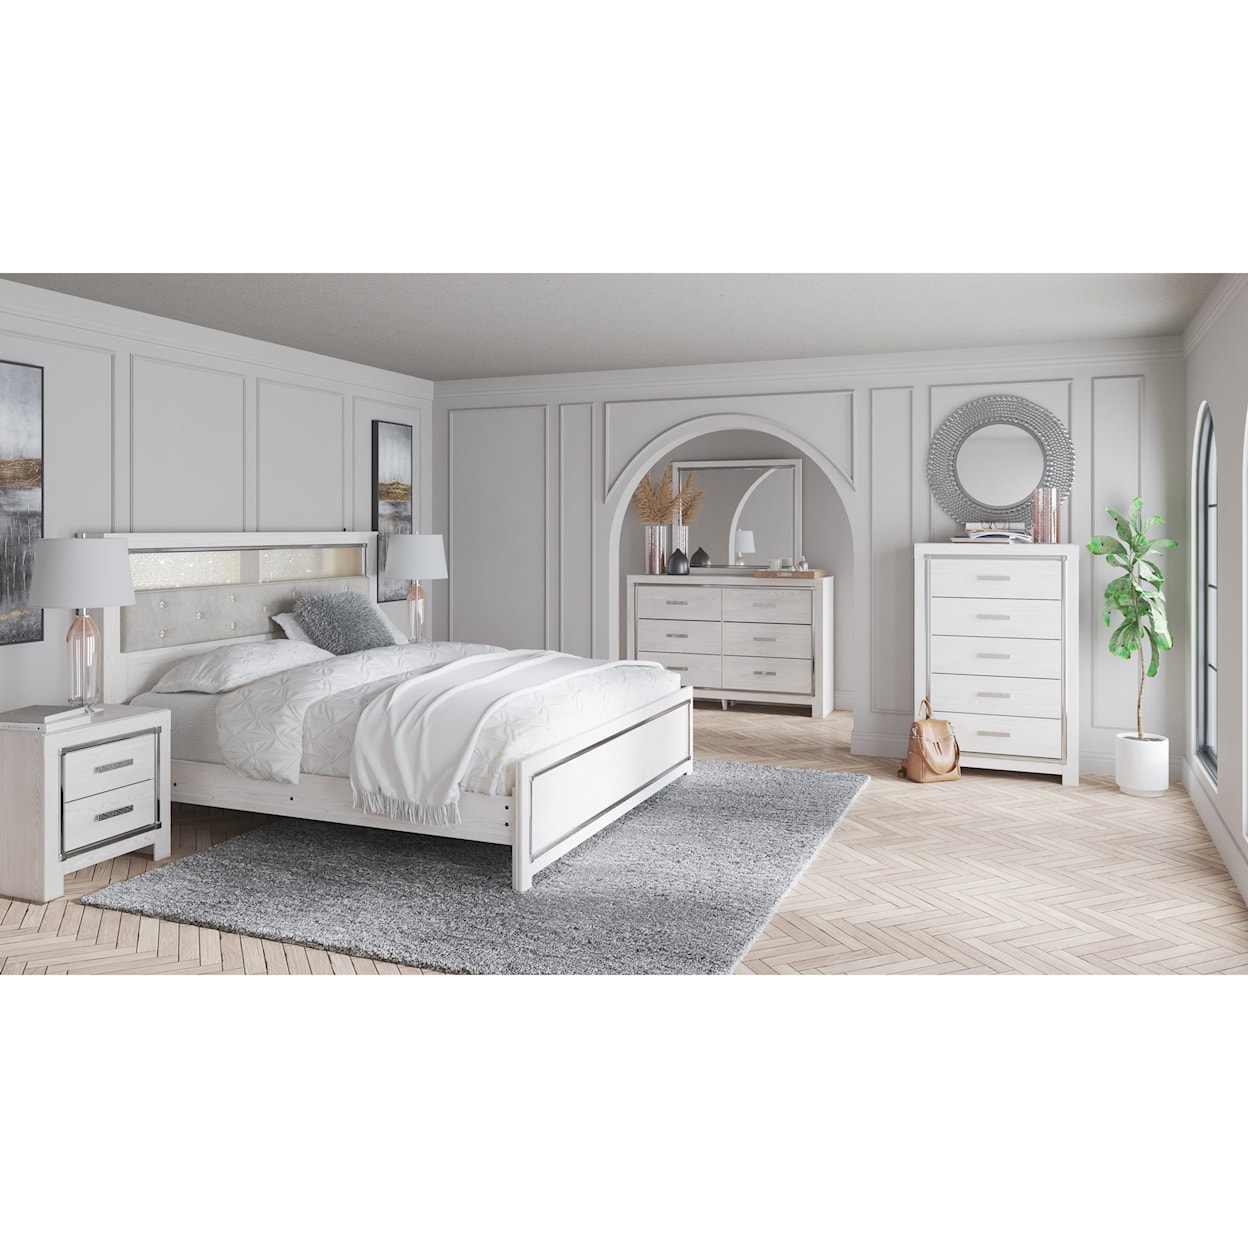 Ashley Signature Design Altyra King Bedroom Group